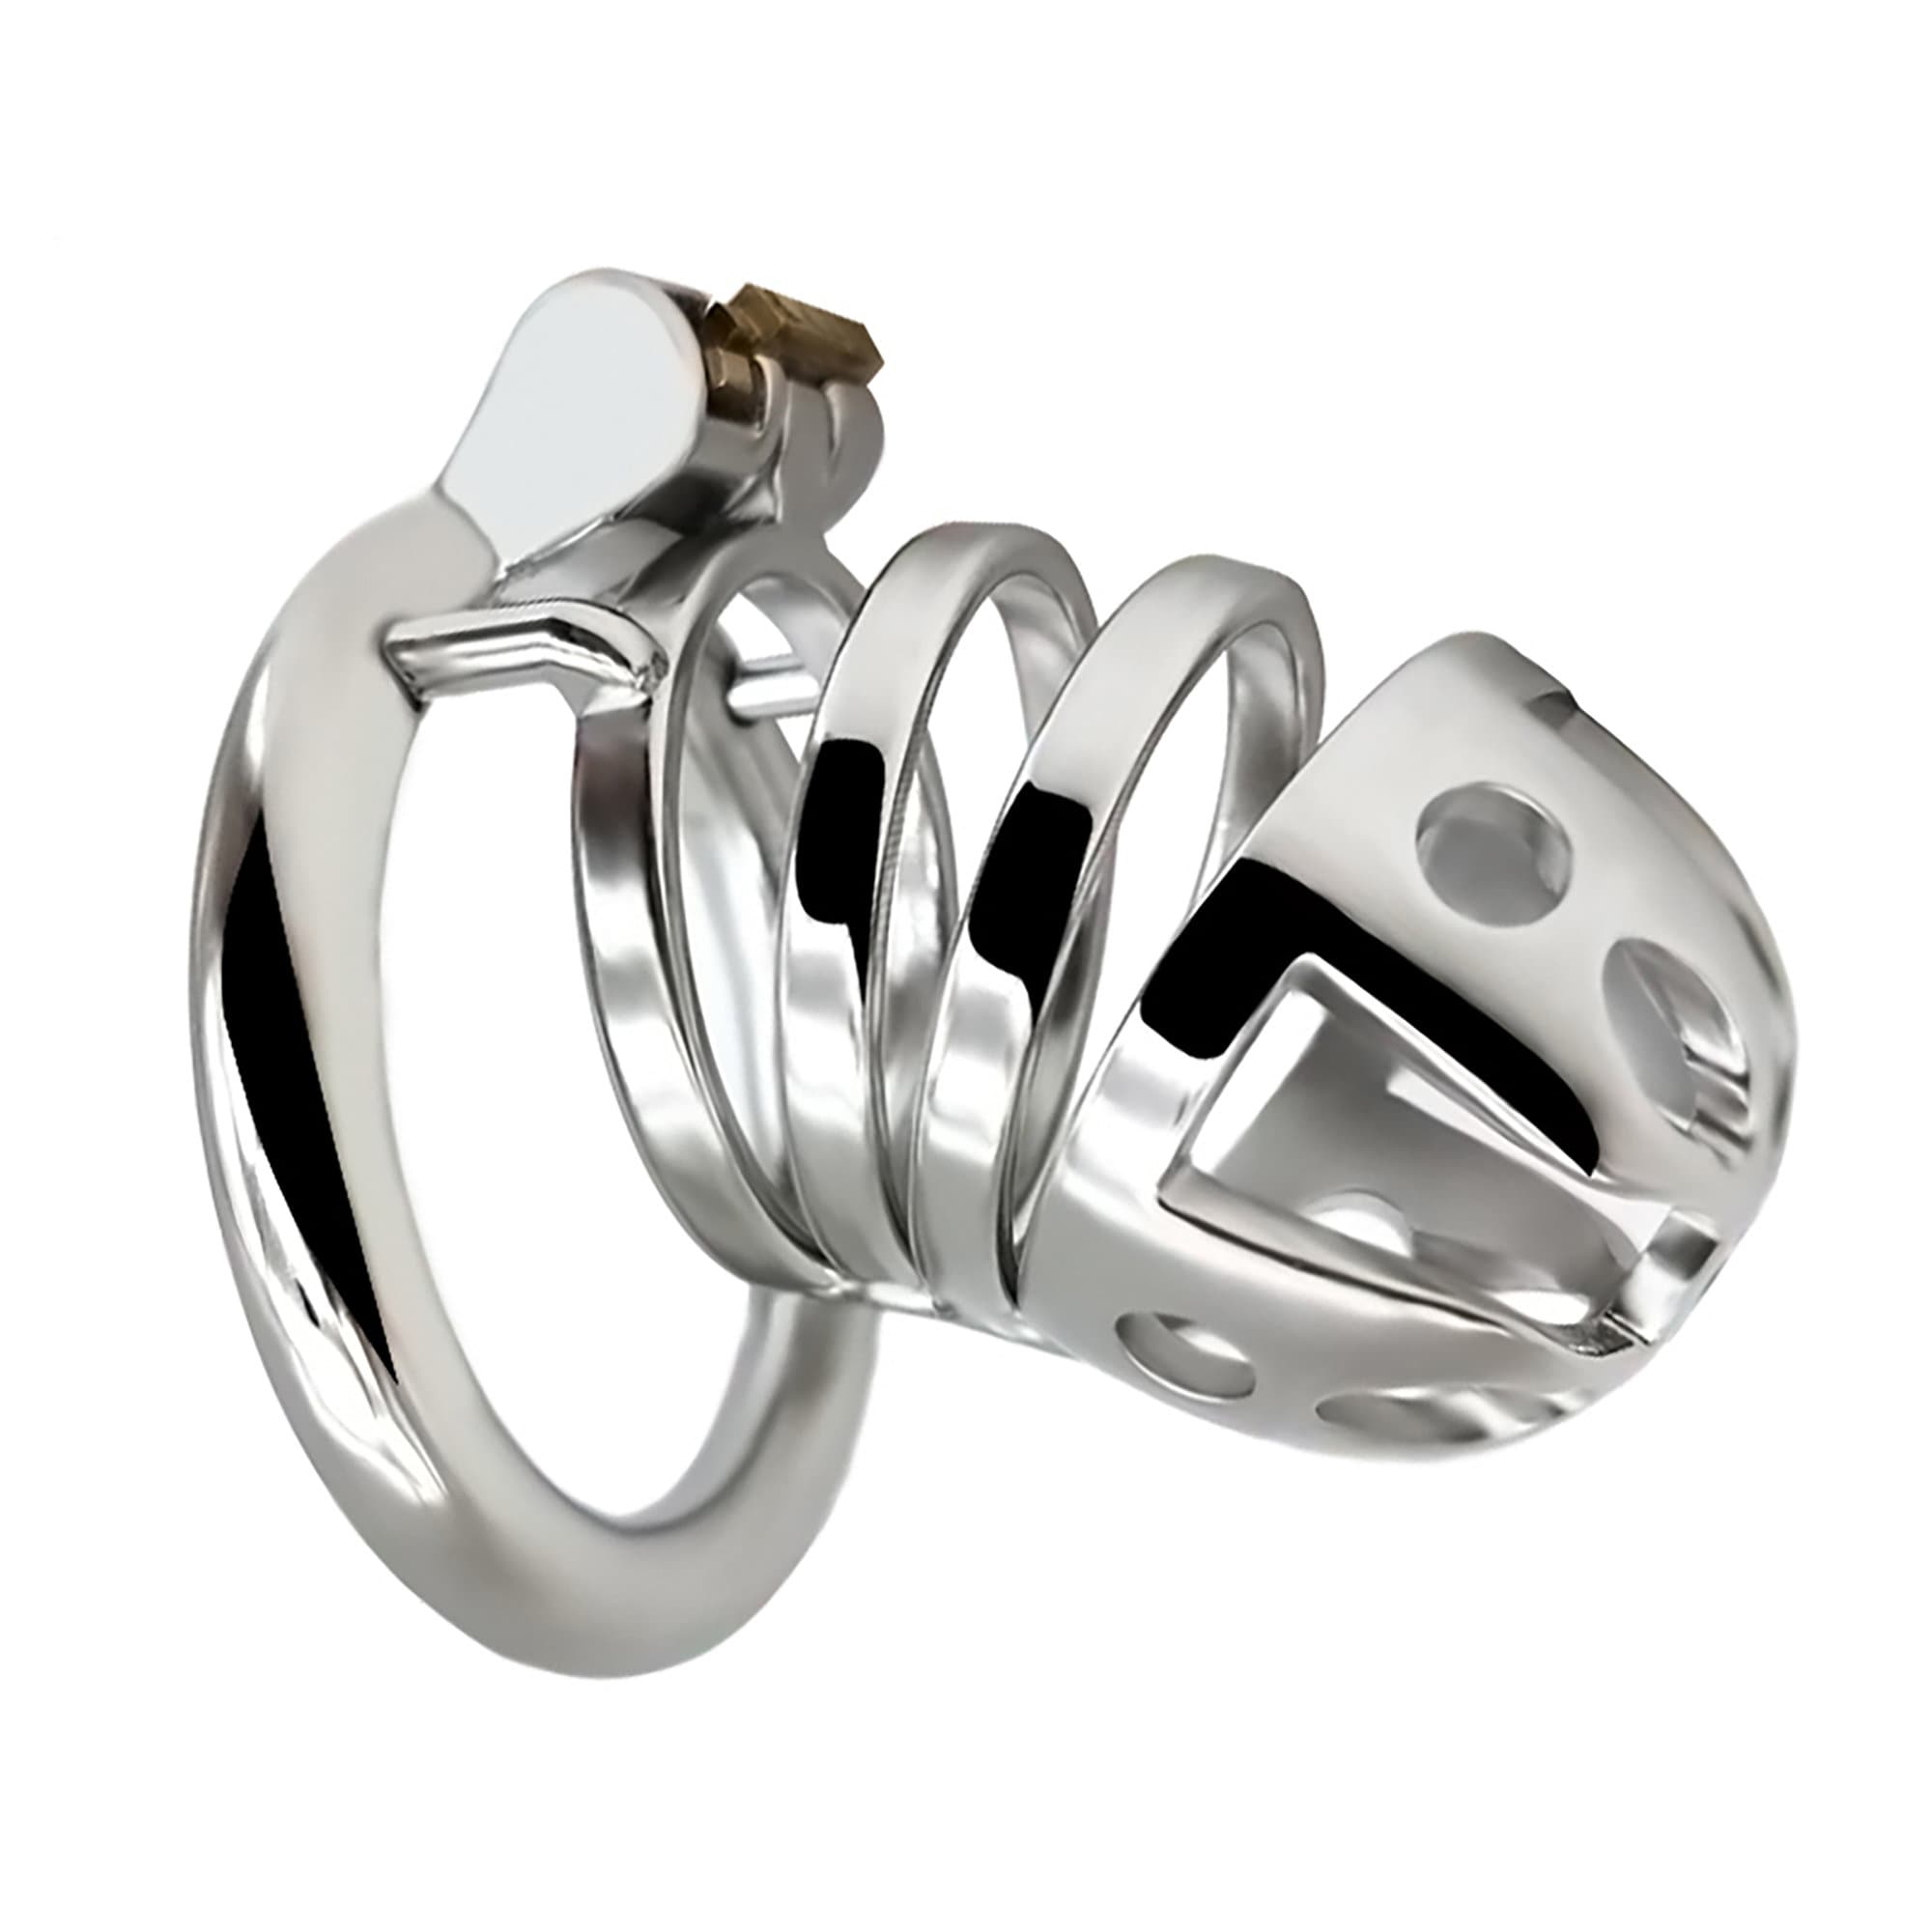 Stainless Steel Male Chastity Device Super Small Cage Men Metal Locking  Belt 160